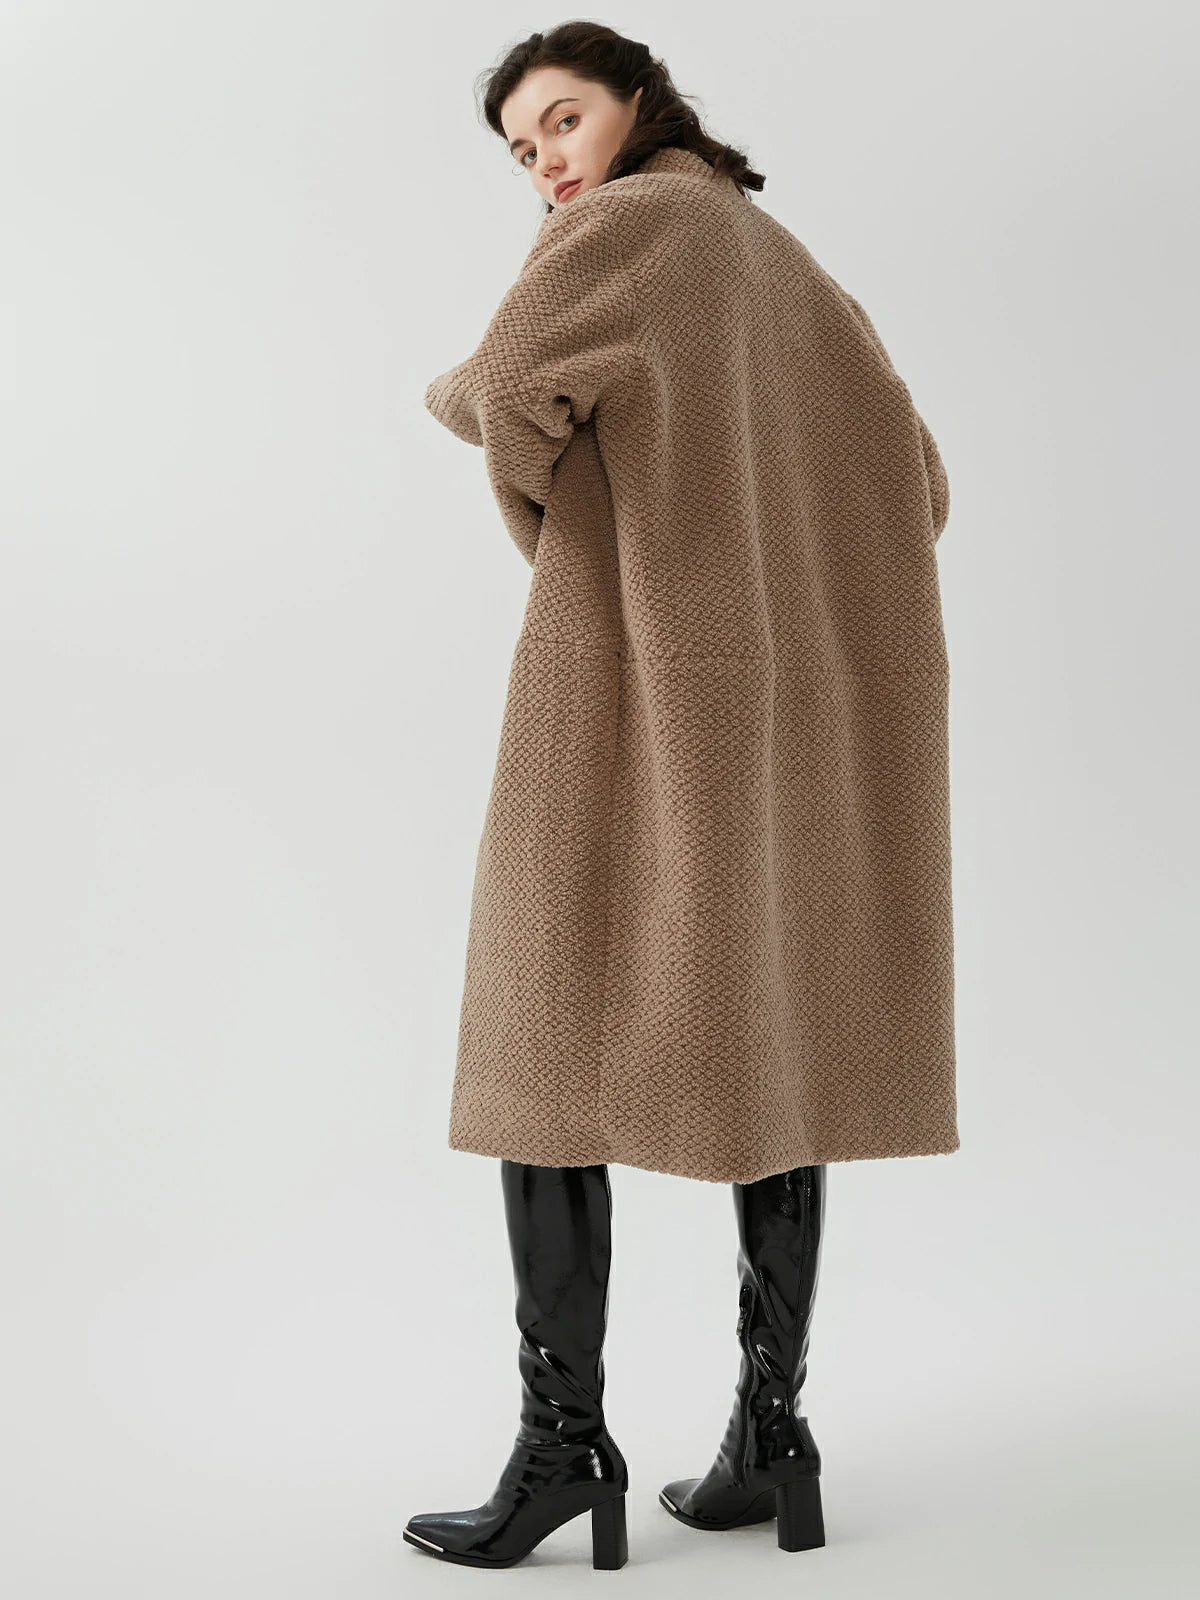 Open-front design, brown long coat with elegant lines, a fashionable wardrobe staple)